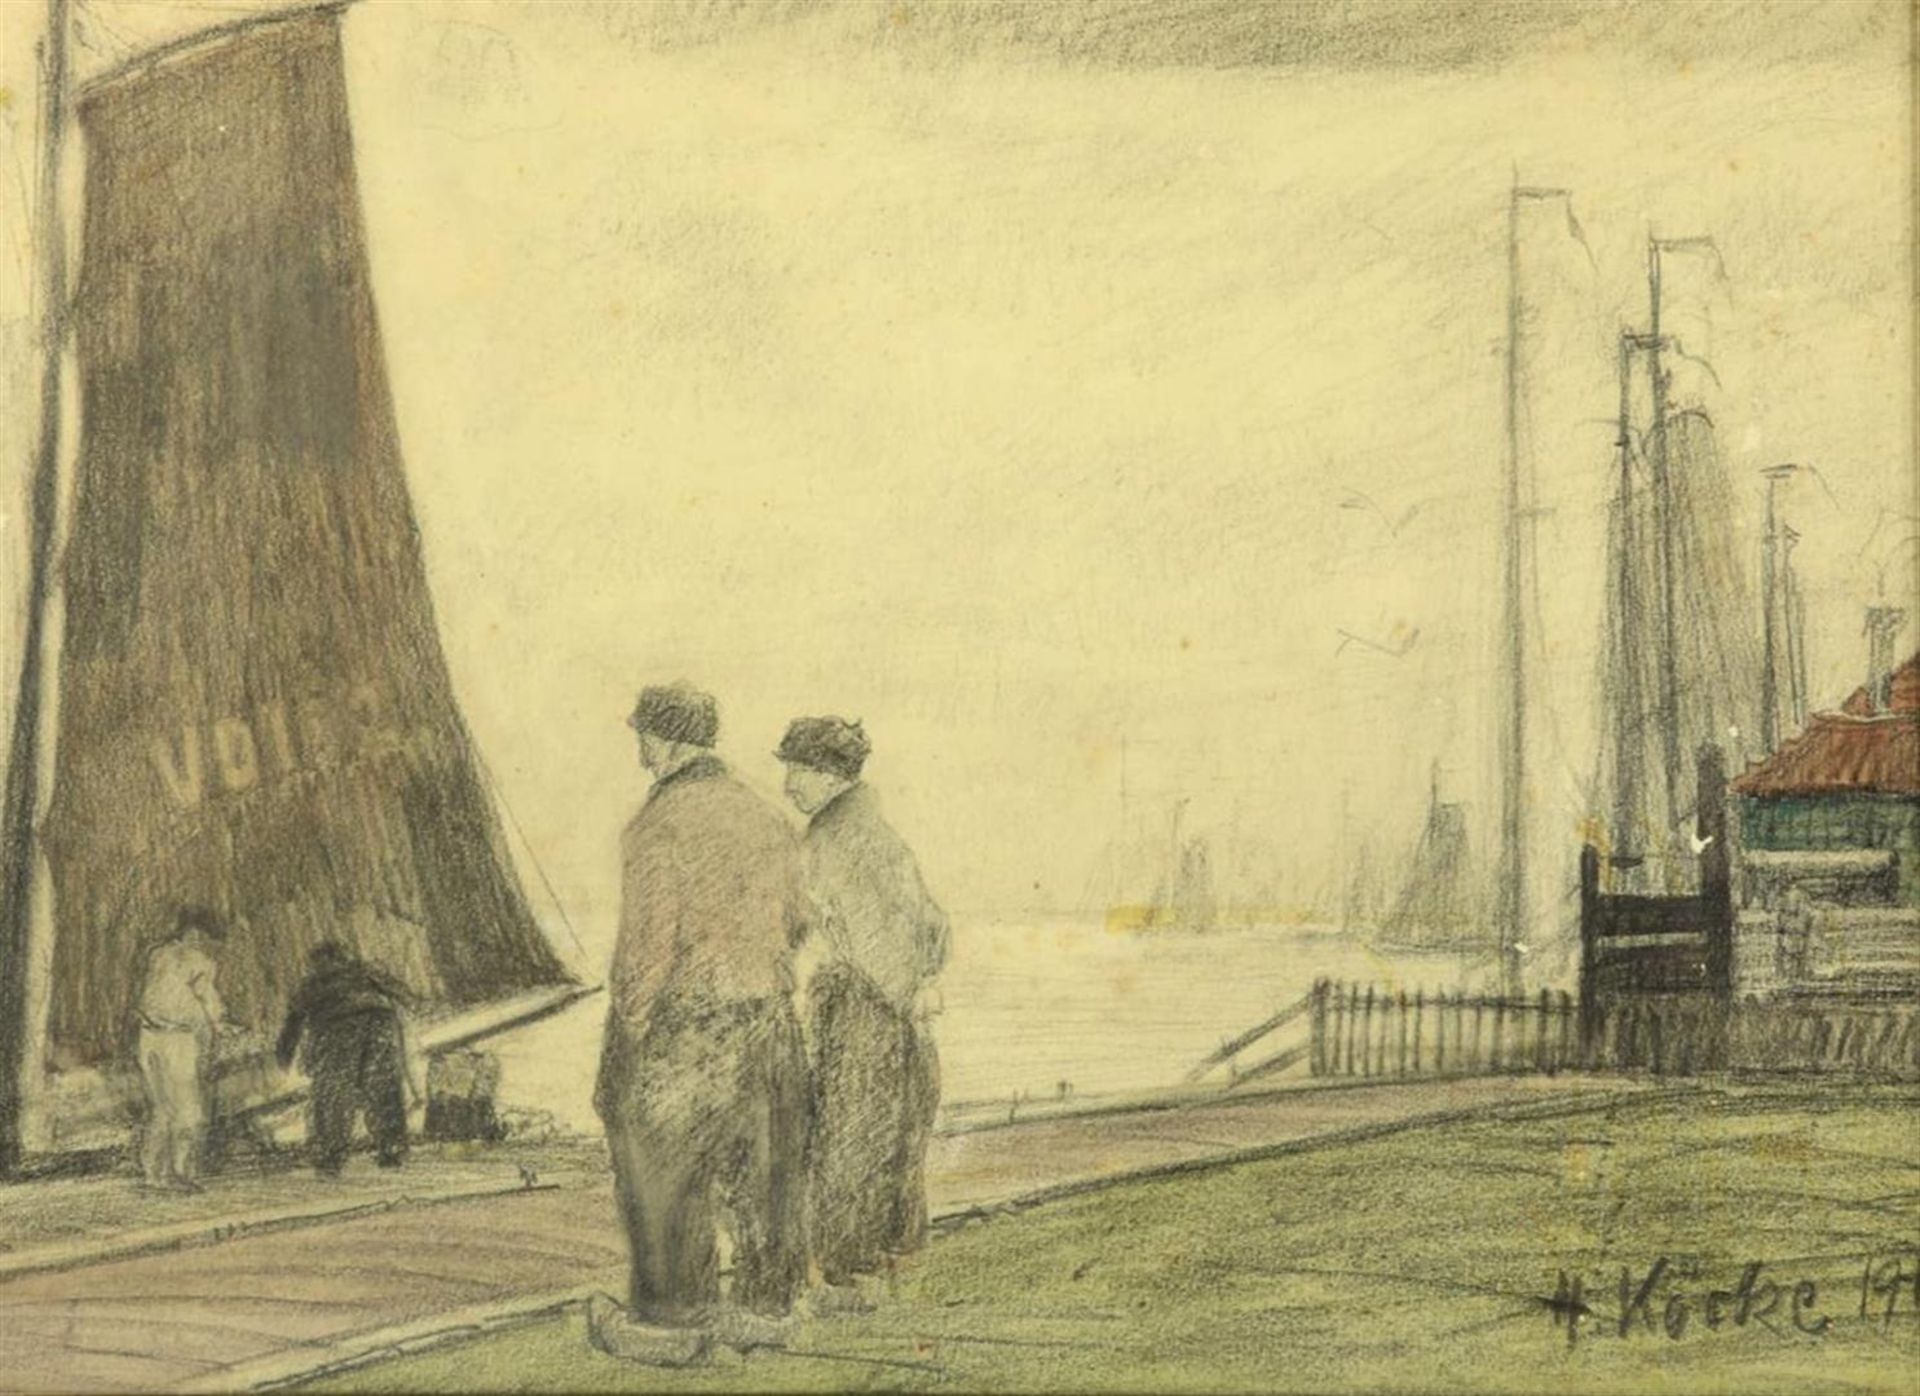 Hugo Köcke (1874-1956) Fishermen in Volendam harbour, signed and dated 1911 lower right, drawing/